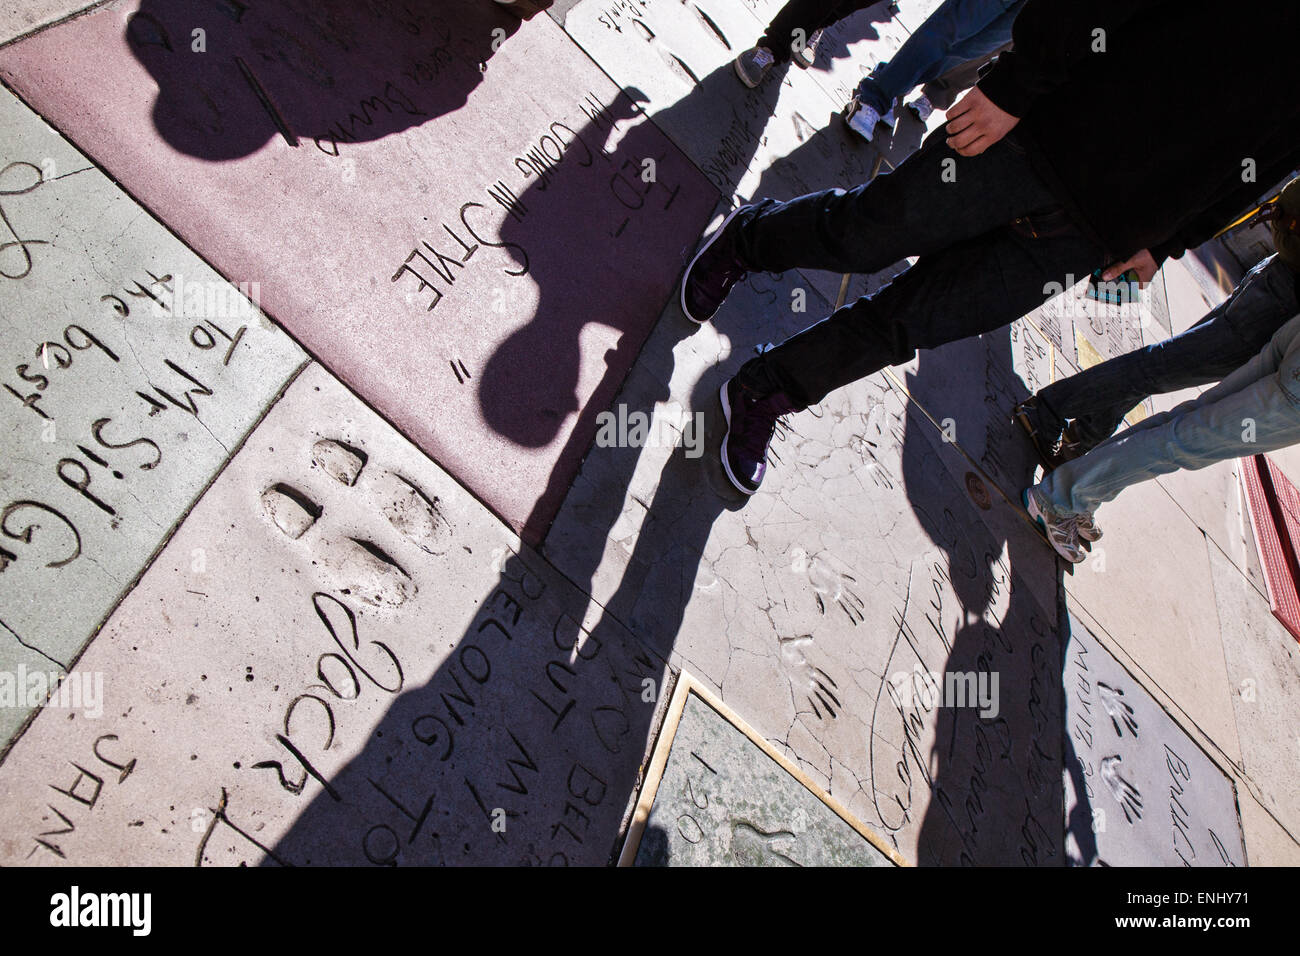 U.S.A., California, Los Angeles, Hollywood, hand and foot prints of celebrities outside the Grauman's Chinese Theatre Stock Photo